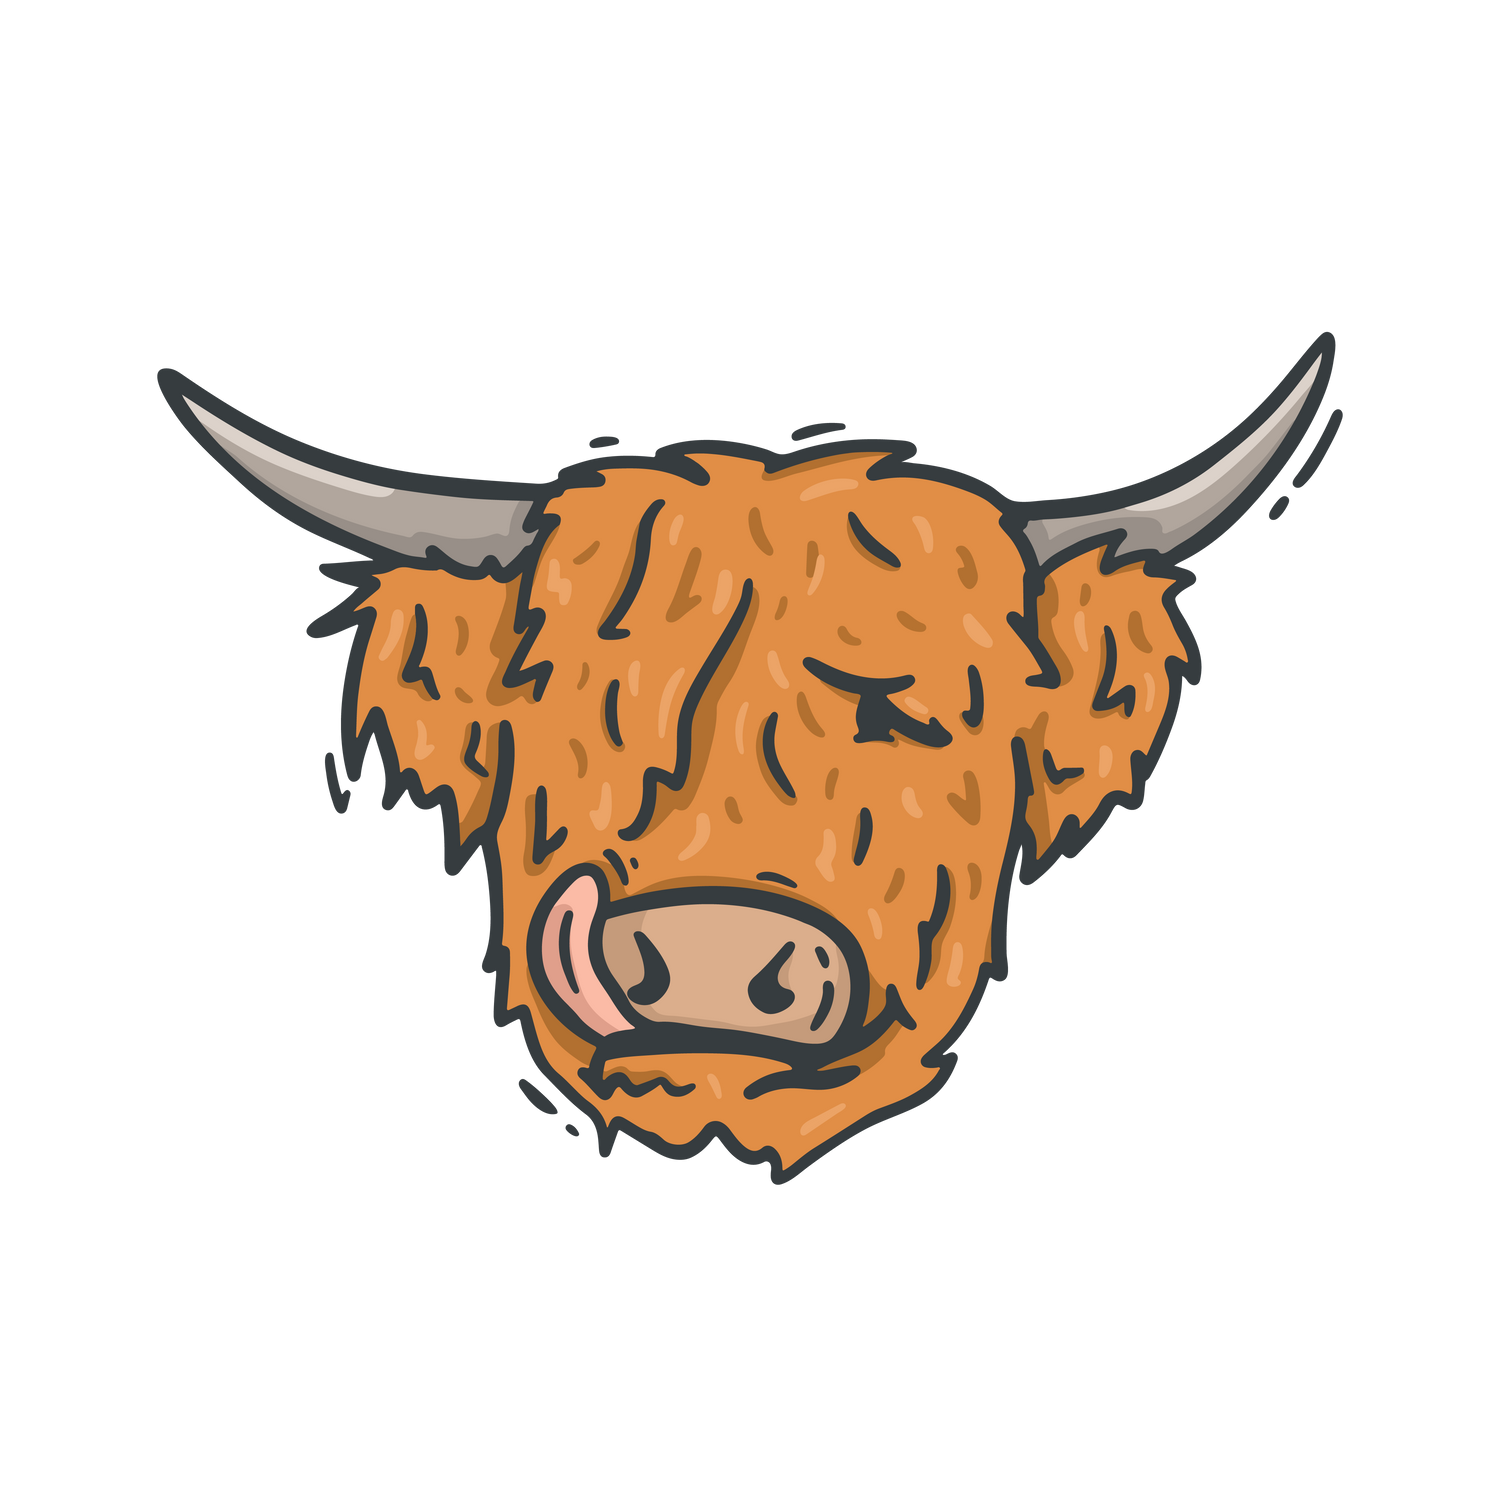 Hector the Highland Coo Illustration